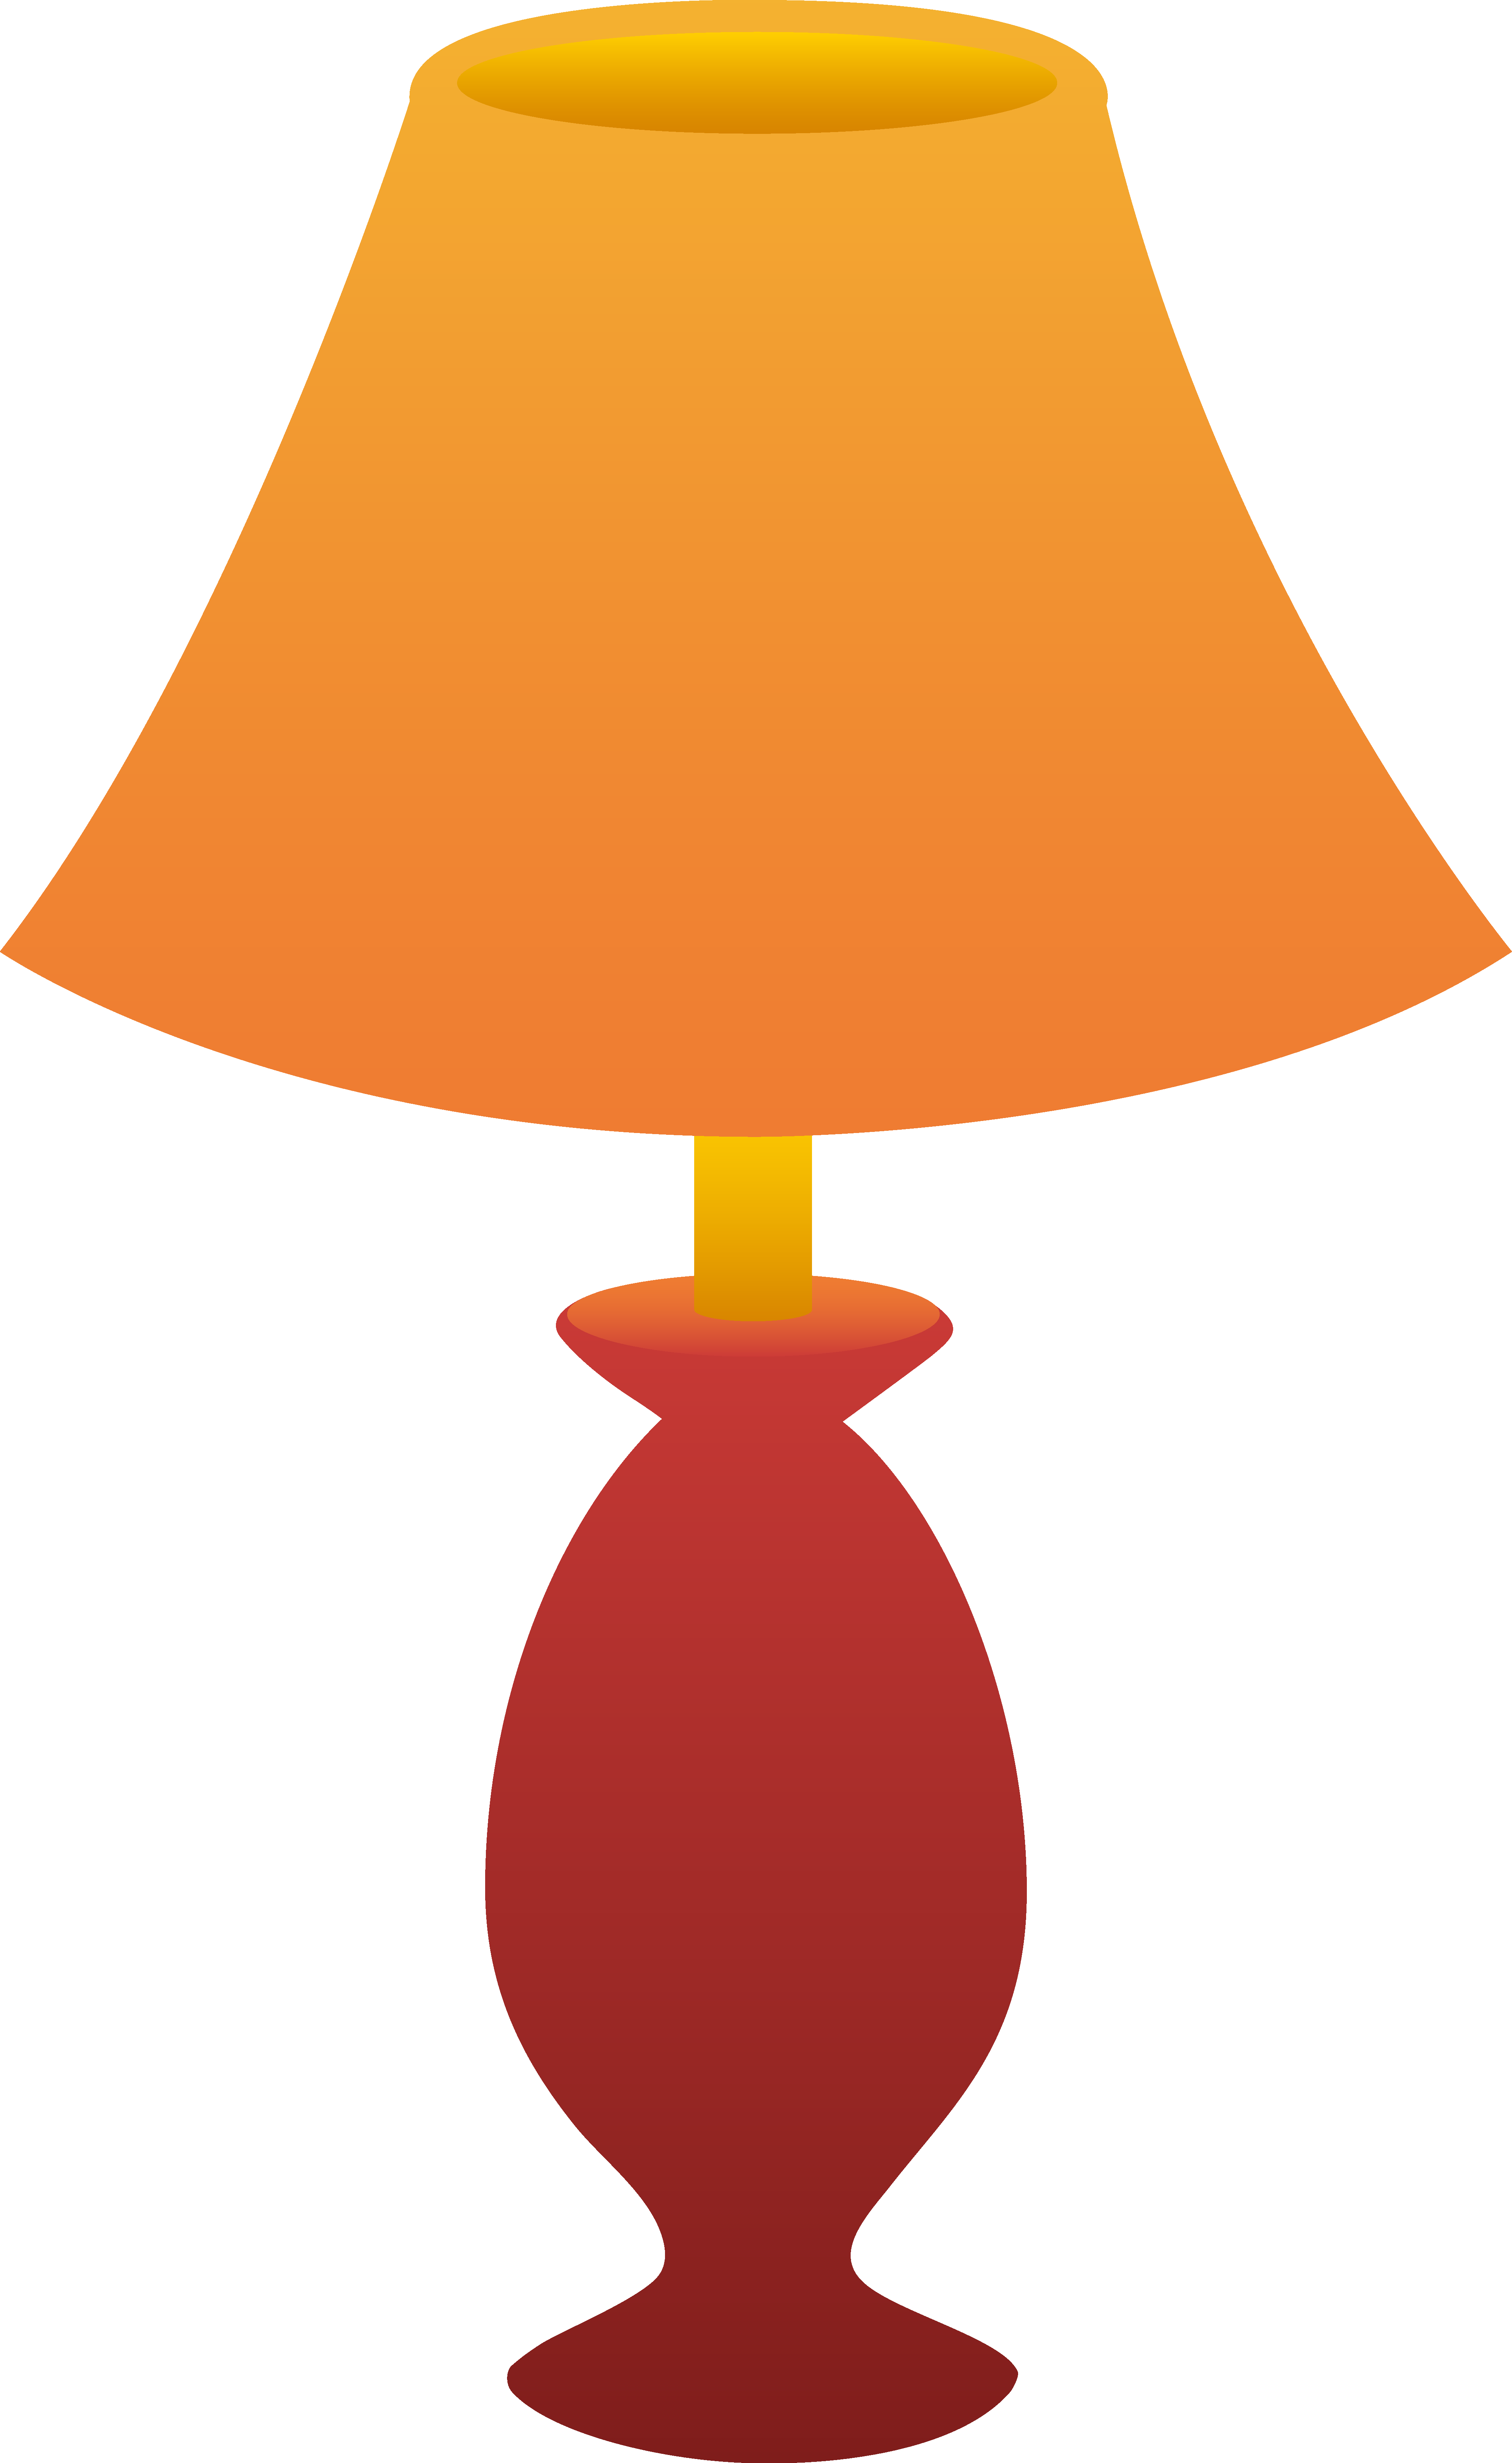 Light shades clipart - Clipground